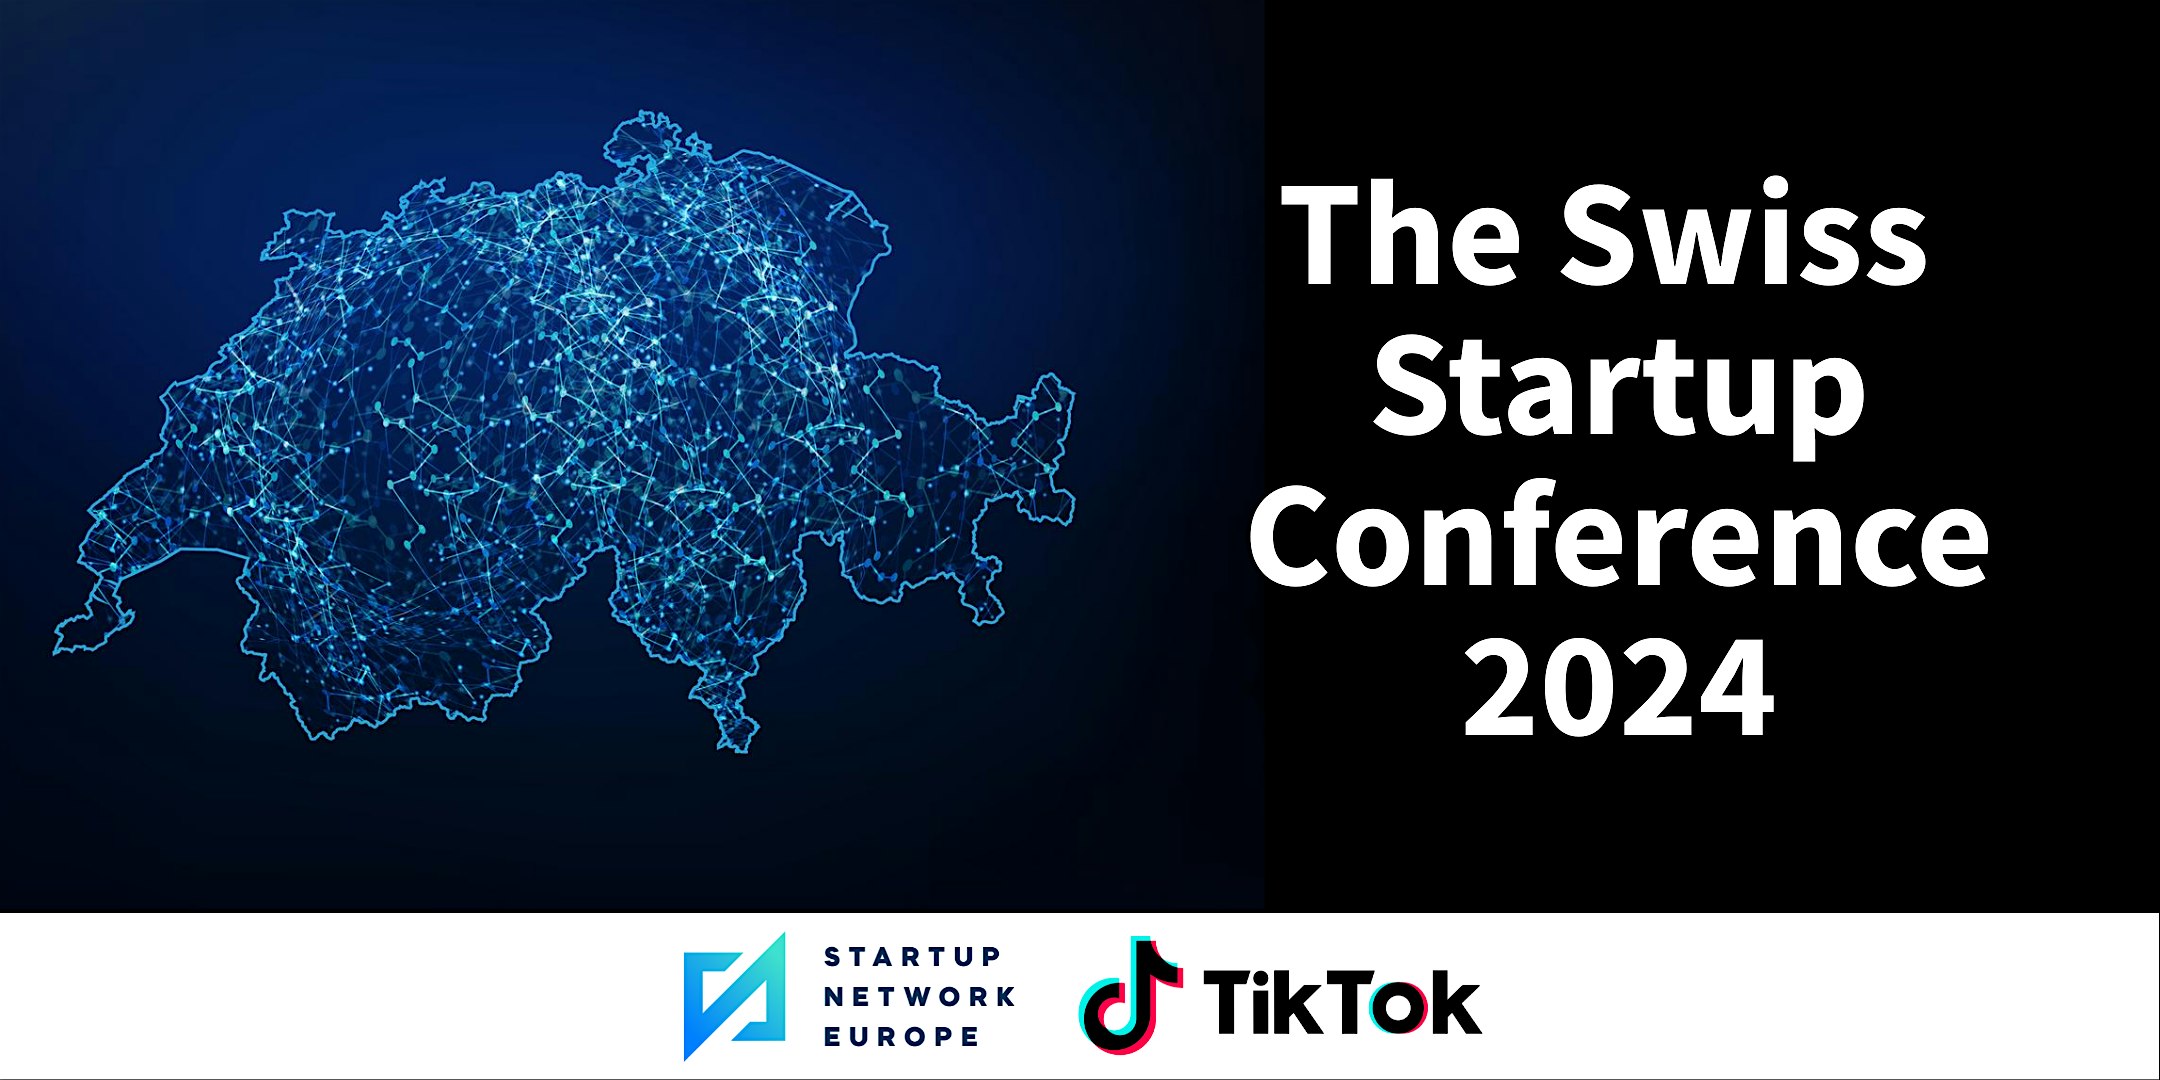 The Swiss Startup Conference 2024